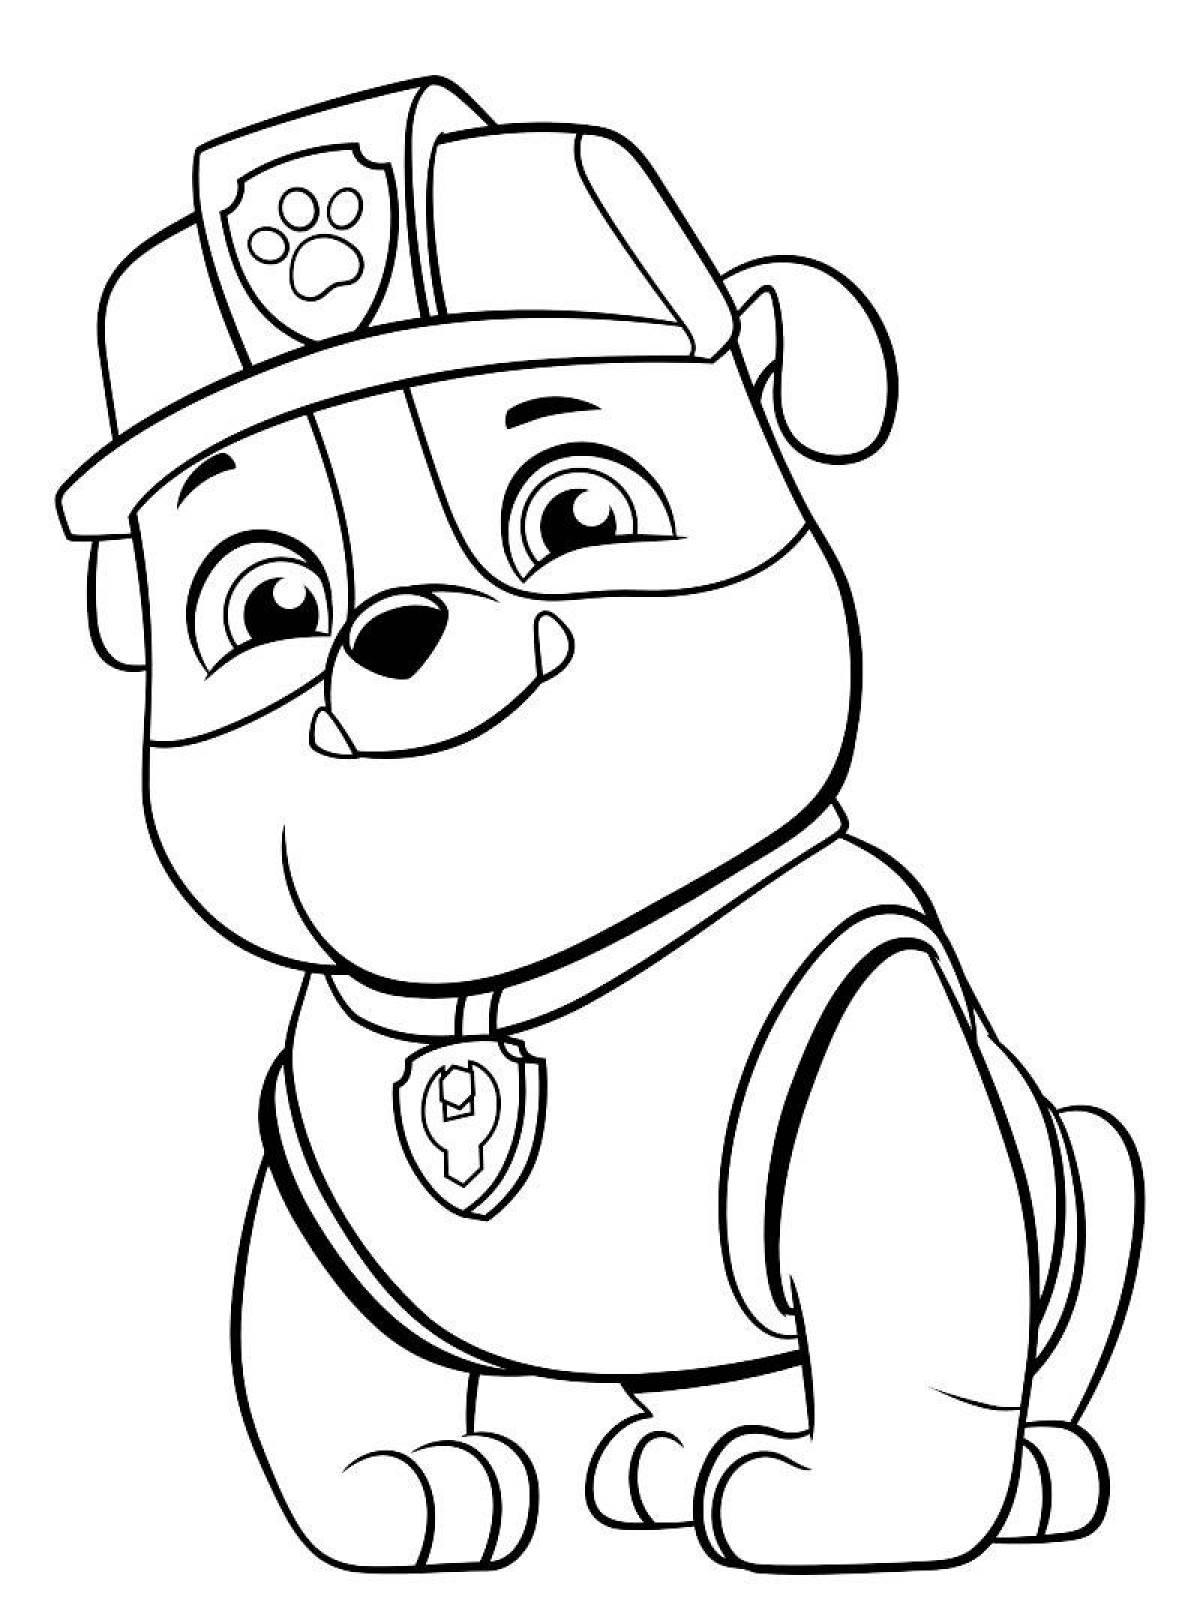 Fun Paw Patrol coloring pages for 6-7 year olds